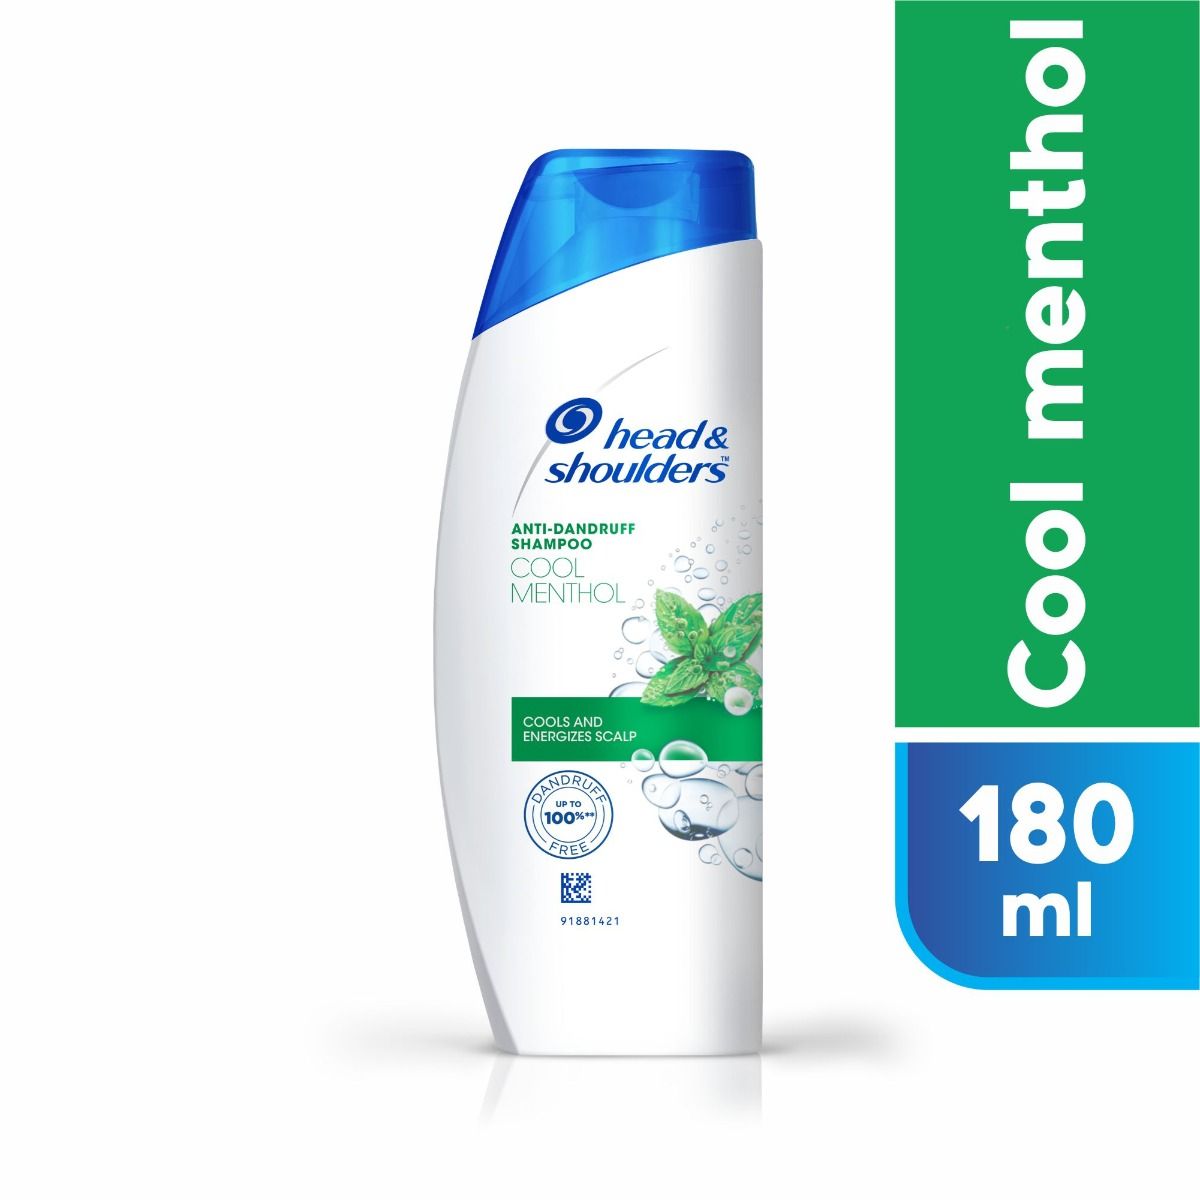 Head & Shoulders Anti-Dandruff Cool Menthol Shampoo, 180 ml Price, Uses,  Side Effects, Composition - Apollo Pharmacy